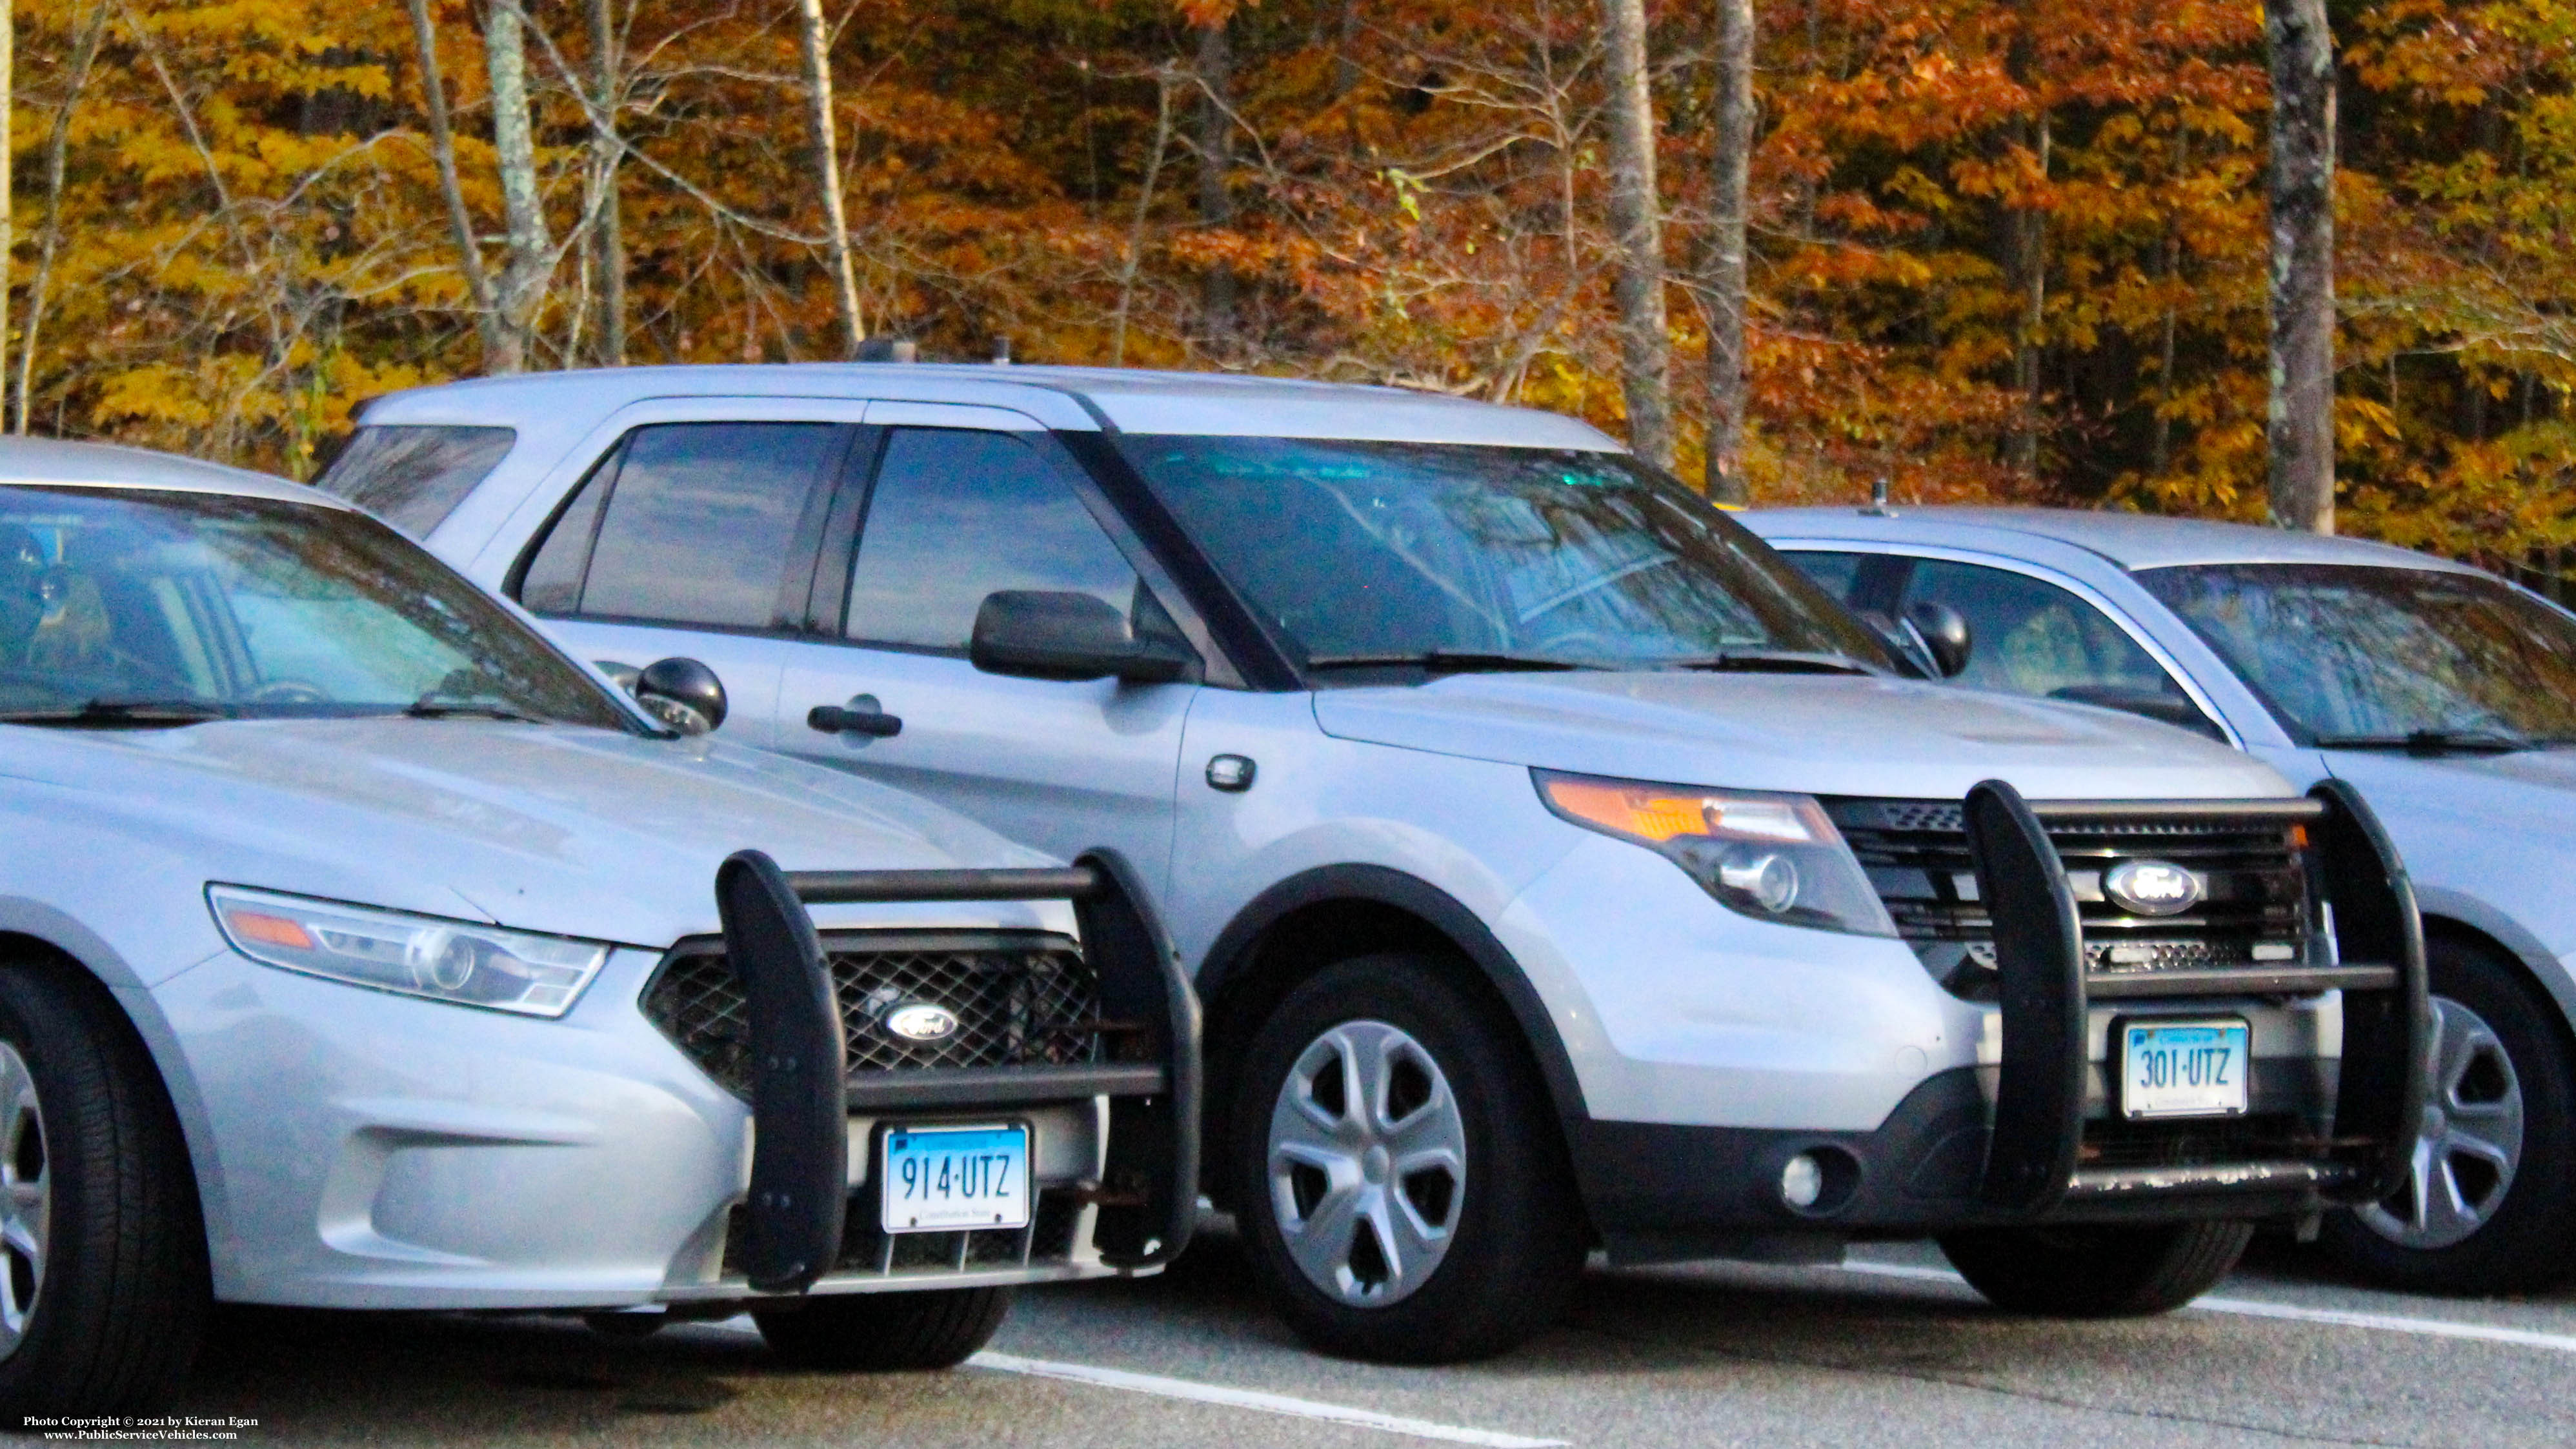 A photo  of Connecticut State Police
            Cruiser 301, a 2013-2015 Ford Police Interceptor Utility             taken by Kieran Egan